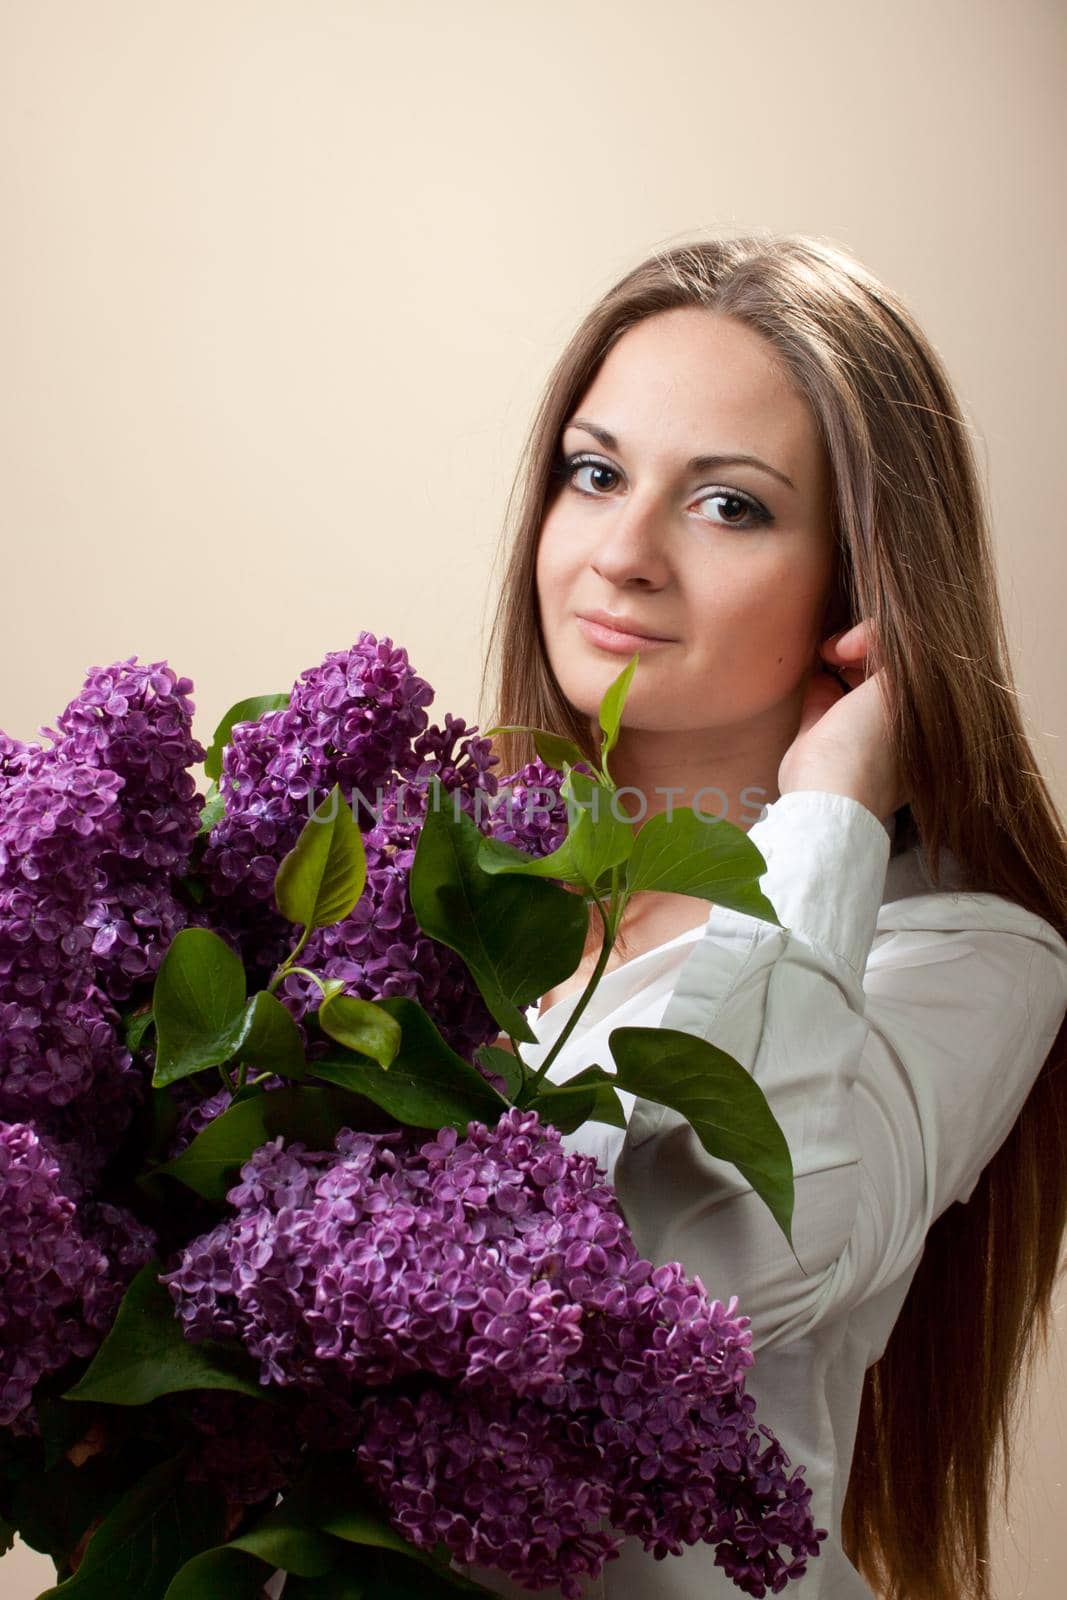 Beautiful young girl with a bouquet of lilac. Spring flowers concept.